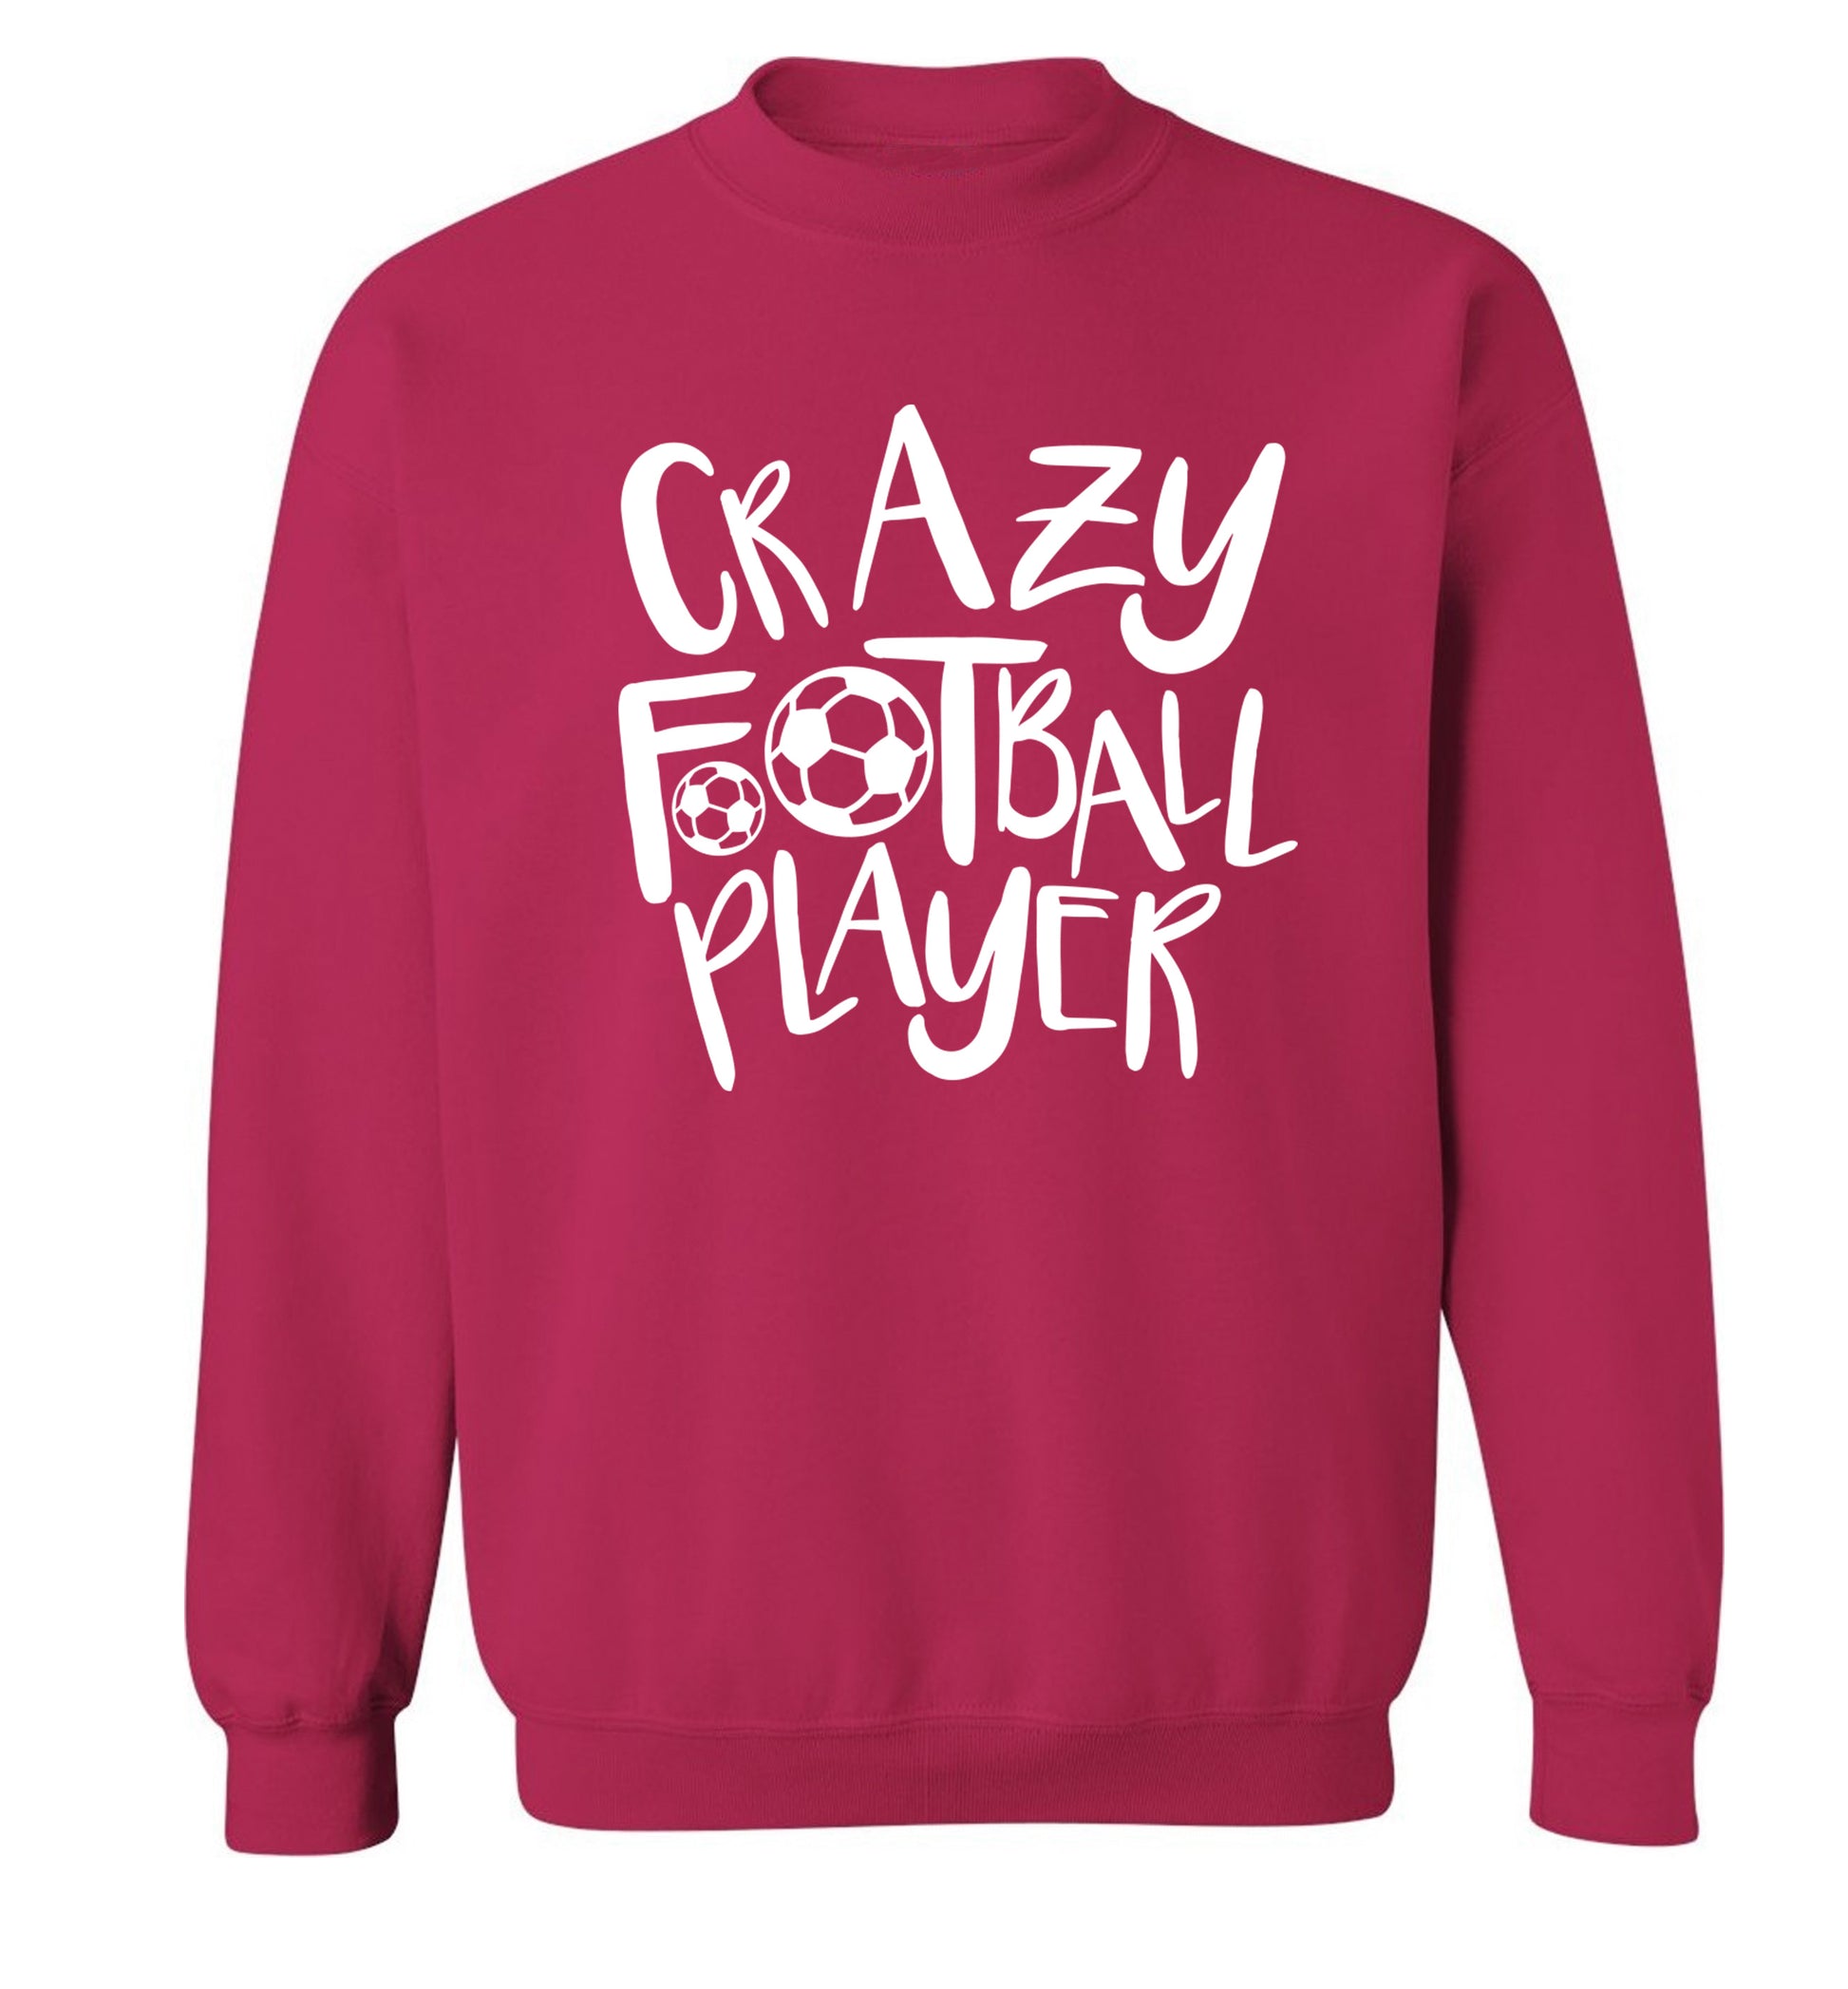 Crazy football player Adult's unisexpink Sweater 2XL